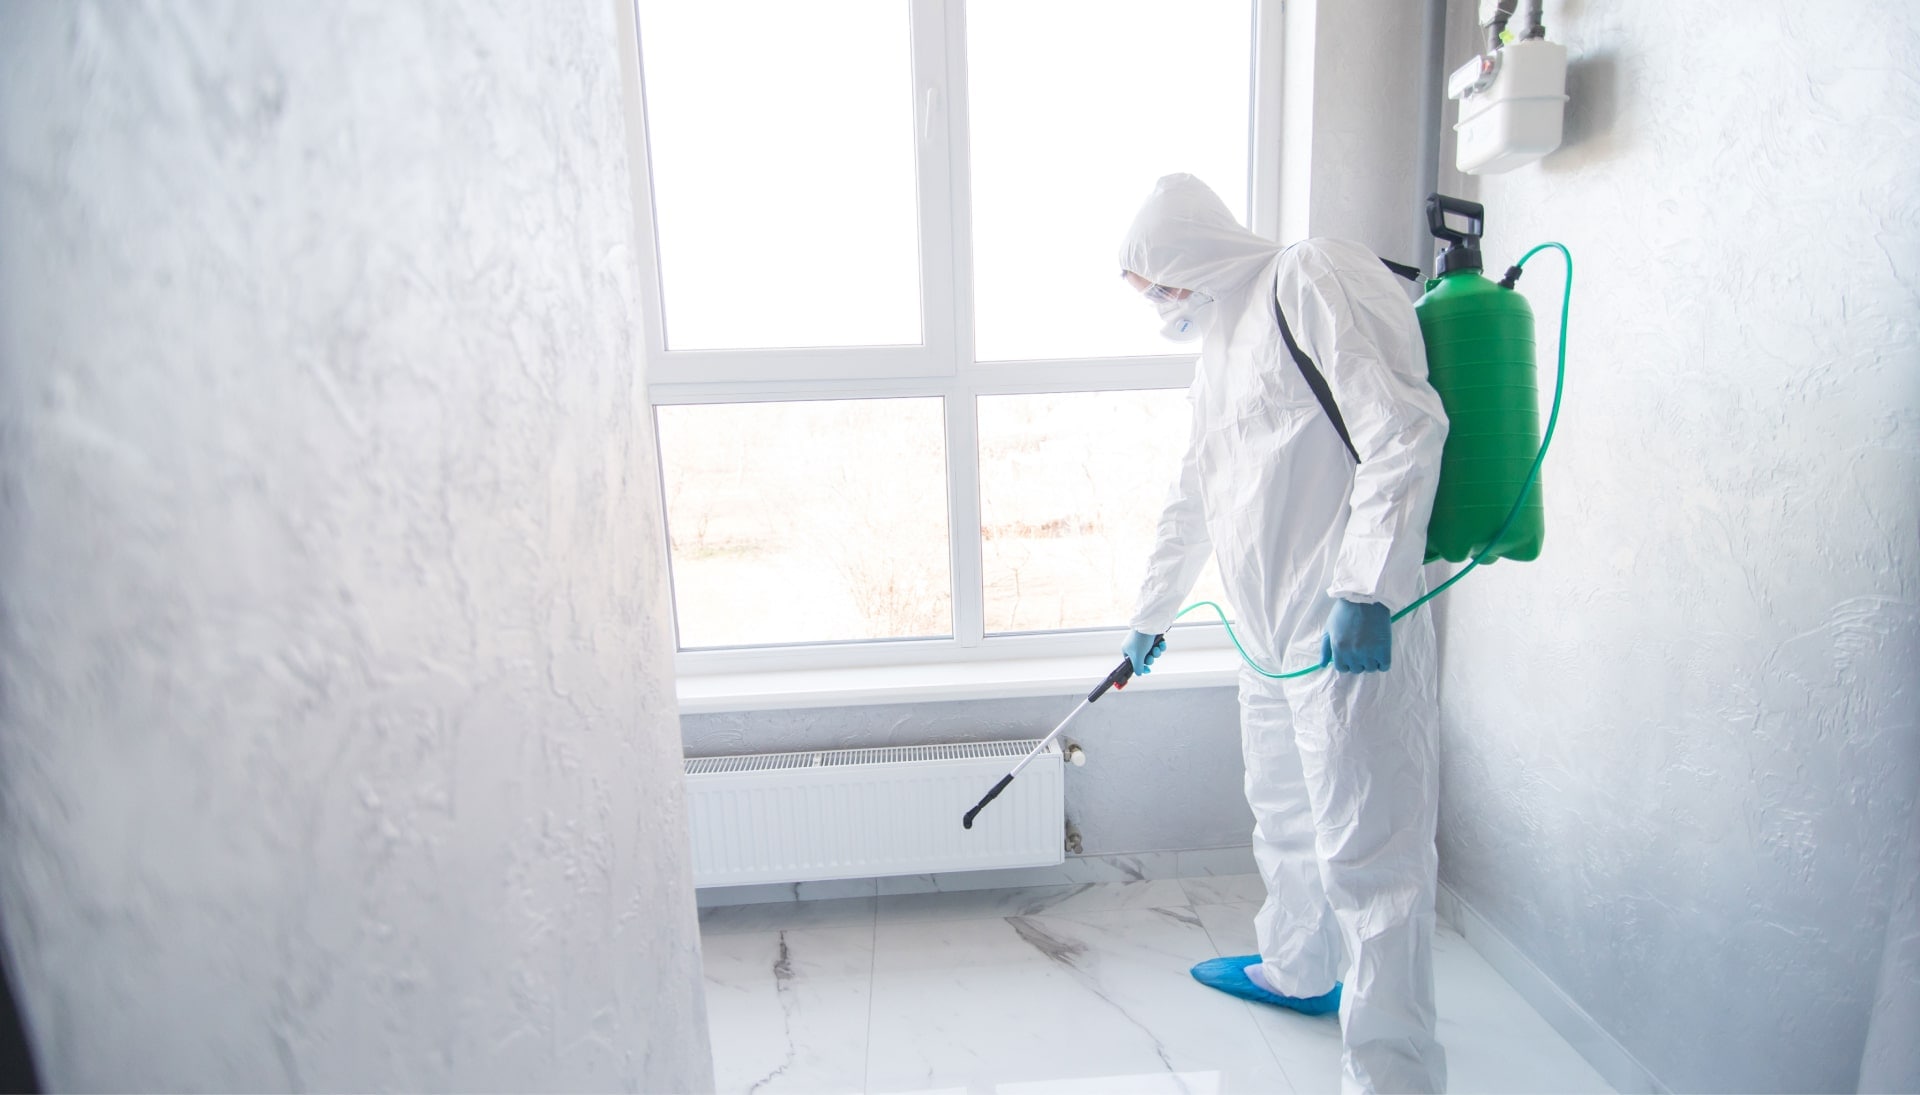 We provide the highest-quality mold inspection, testing, and removal services in the Baltimore, Maryland area.